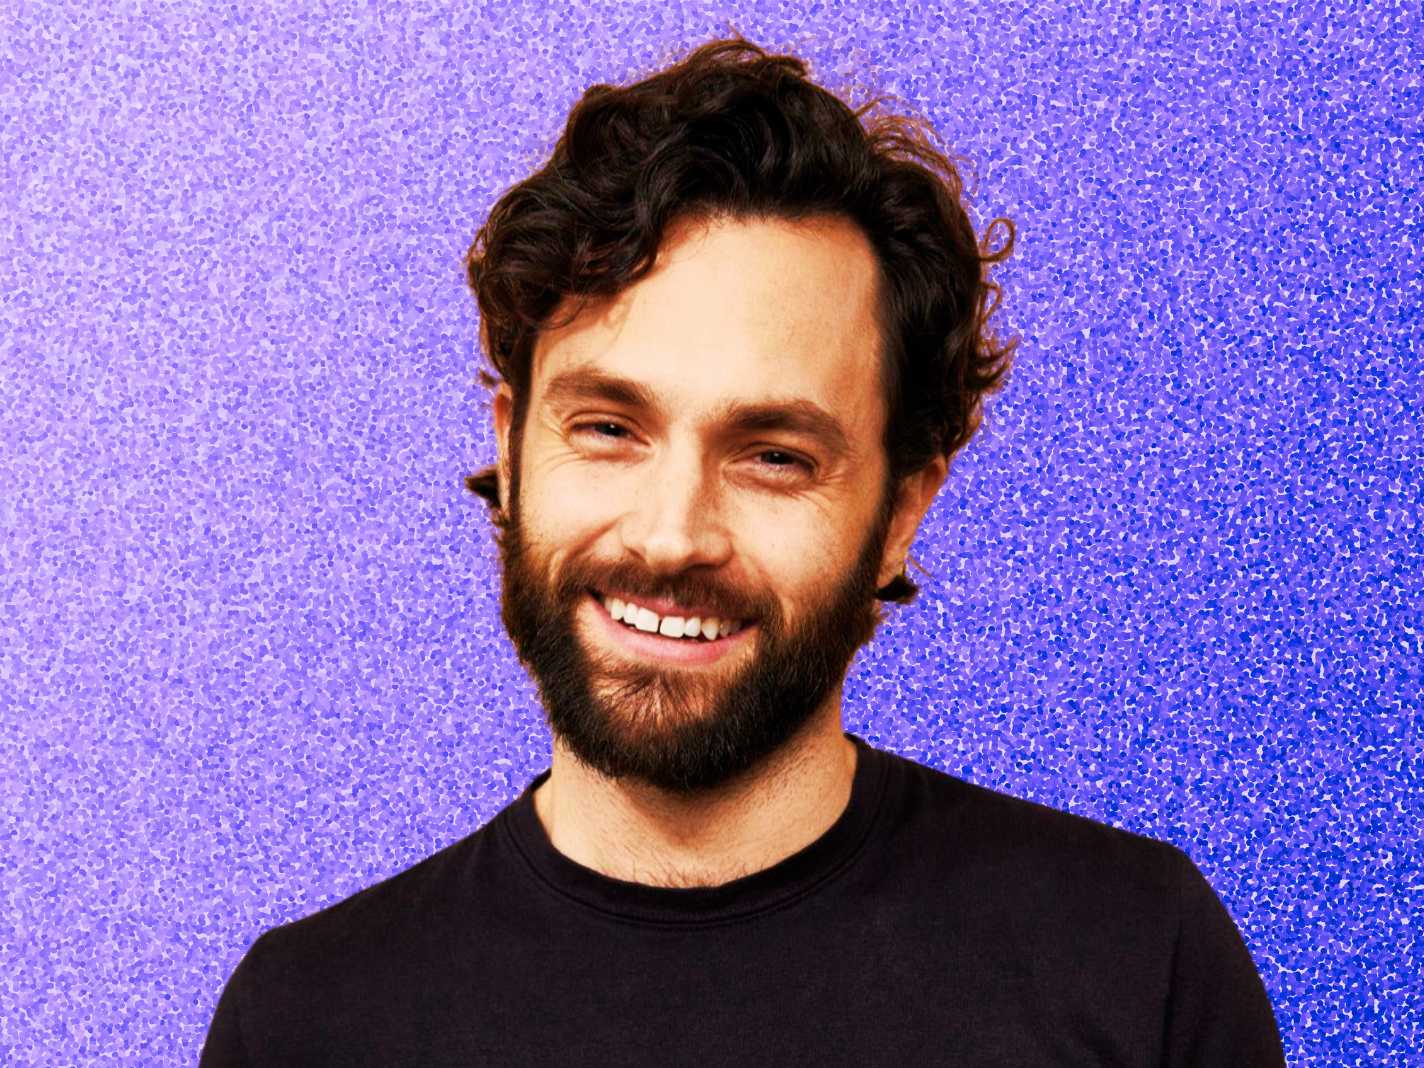 Penn Badgley Fans Can’t Get Enough of the Gap in His Teeth